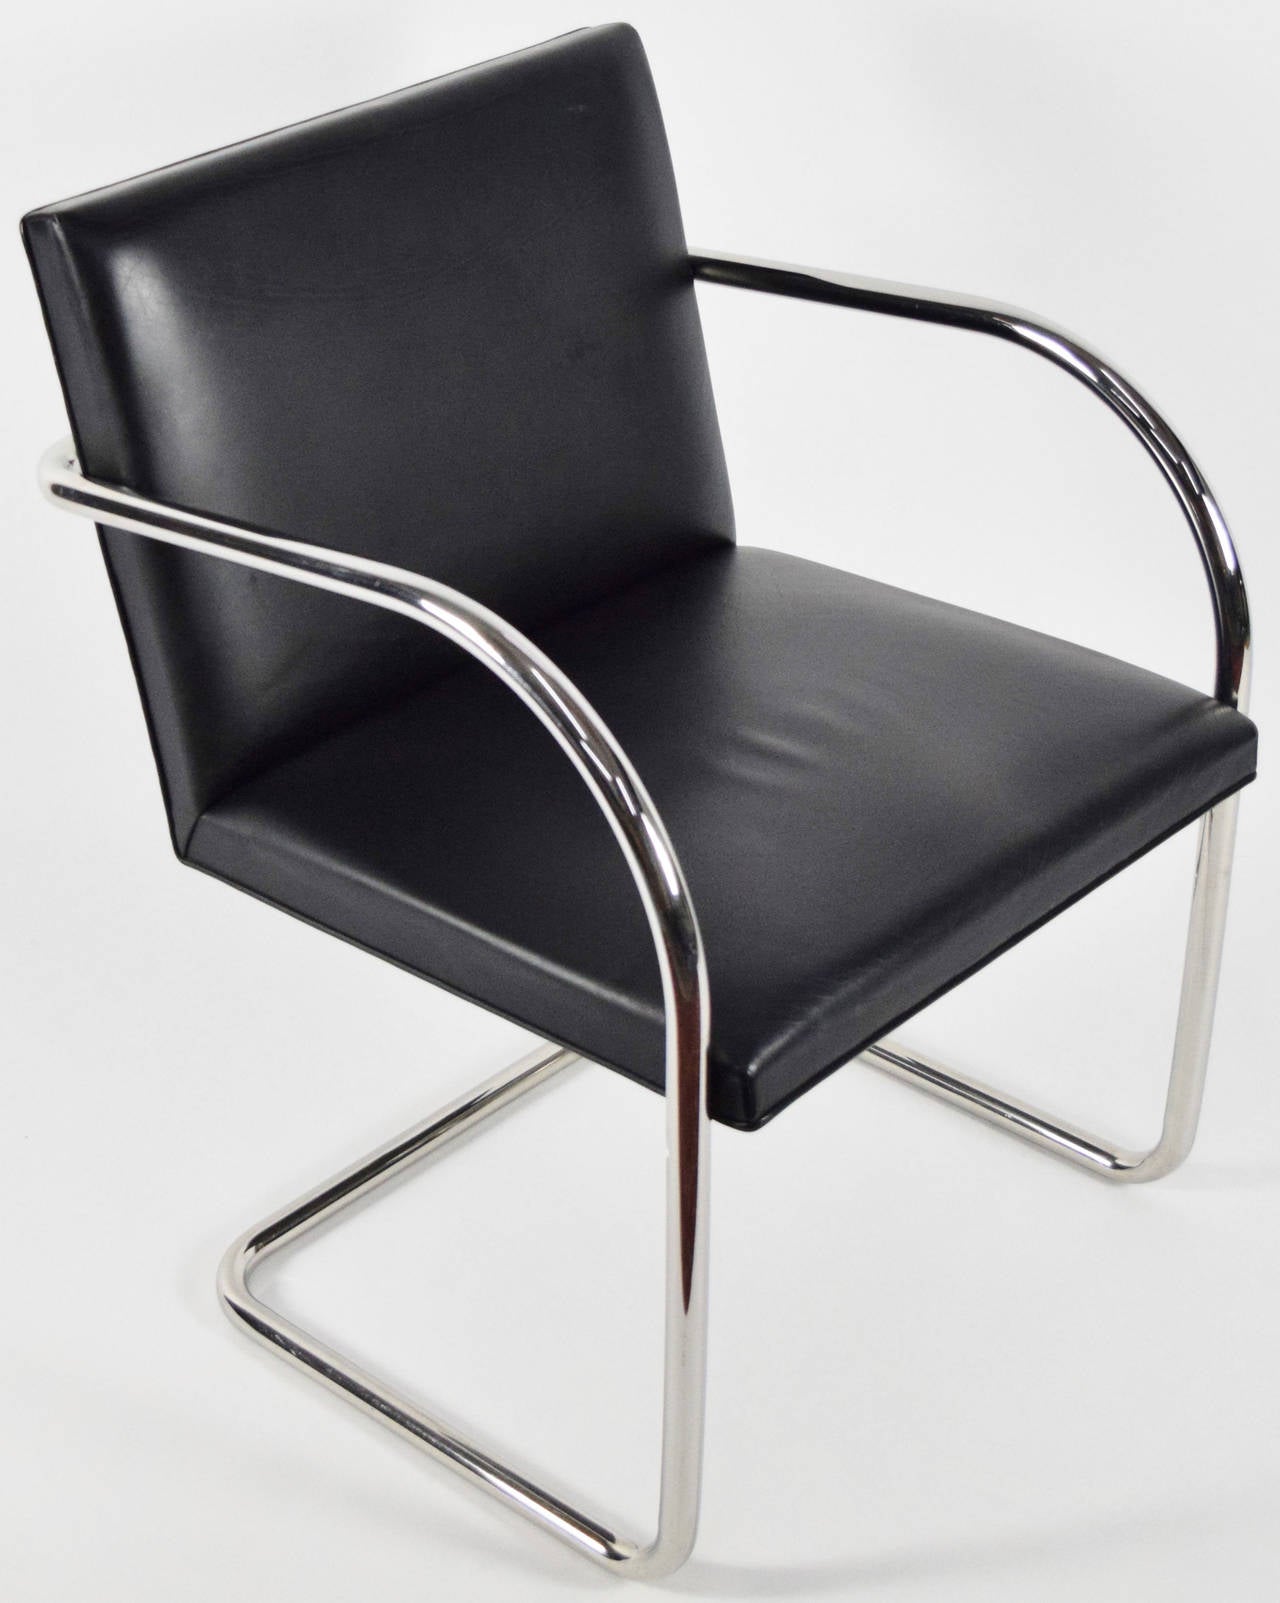 20th Century Fourteen Tubular Brno Chairs by Mies van der Rohe for Knoll